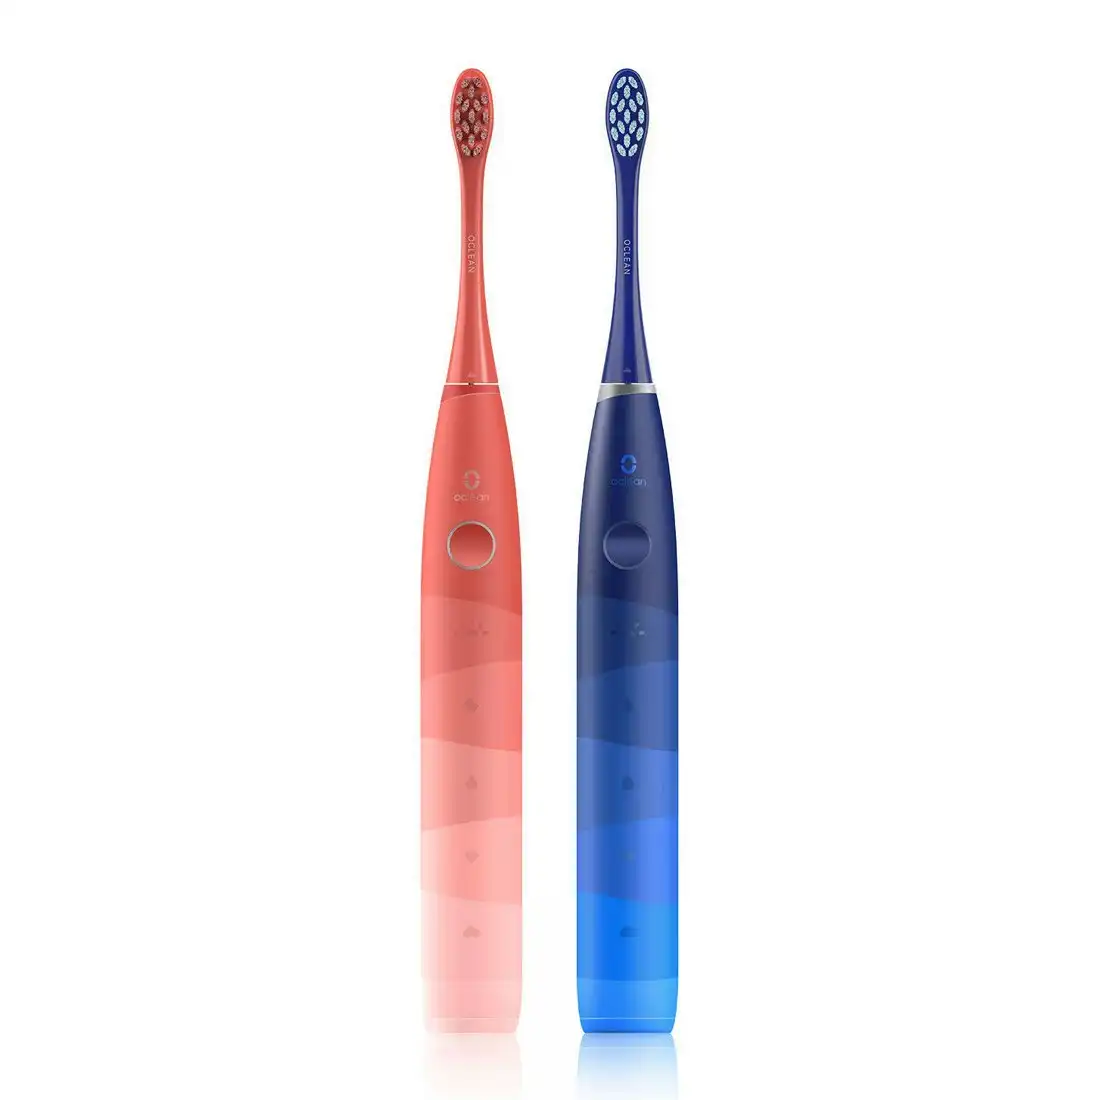 Oclean Find Electric Toothbrush Duo Set (2-pack) - Blue and Red